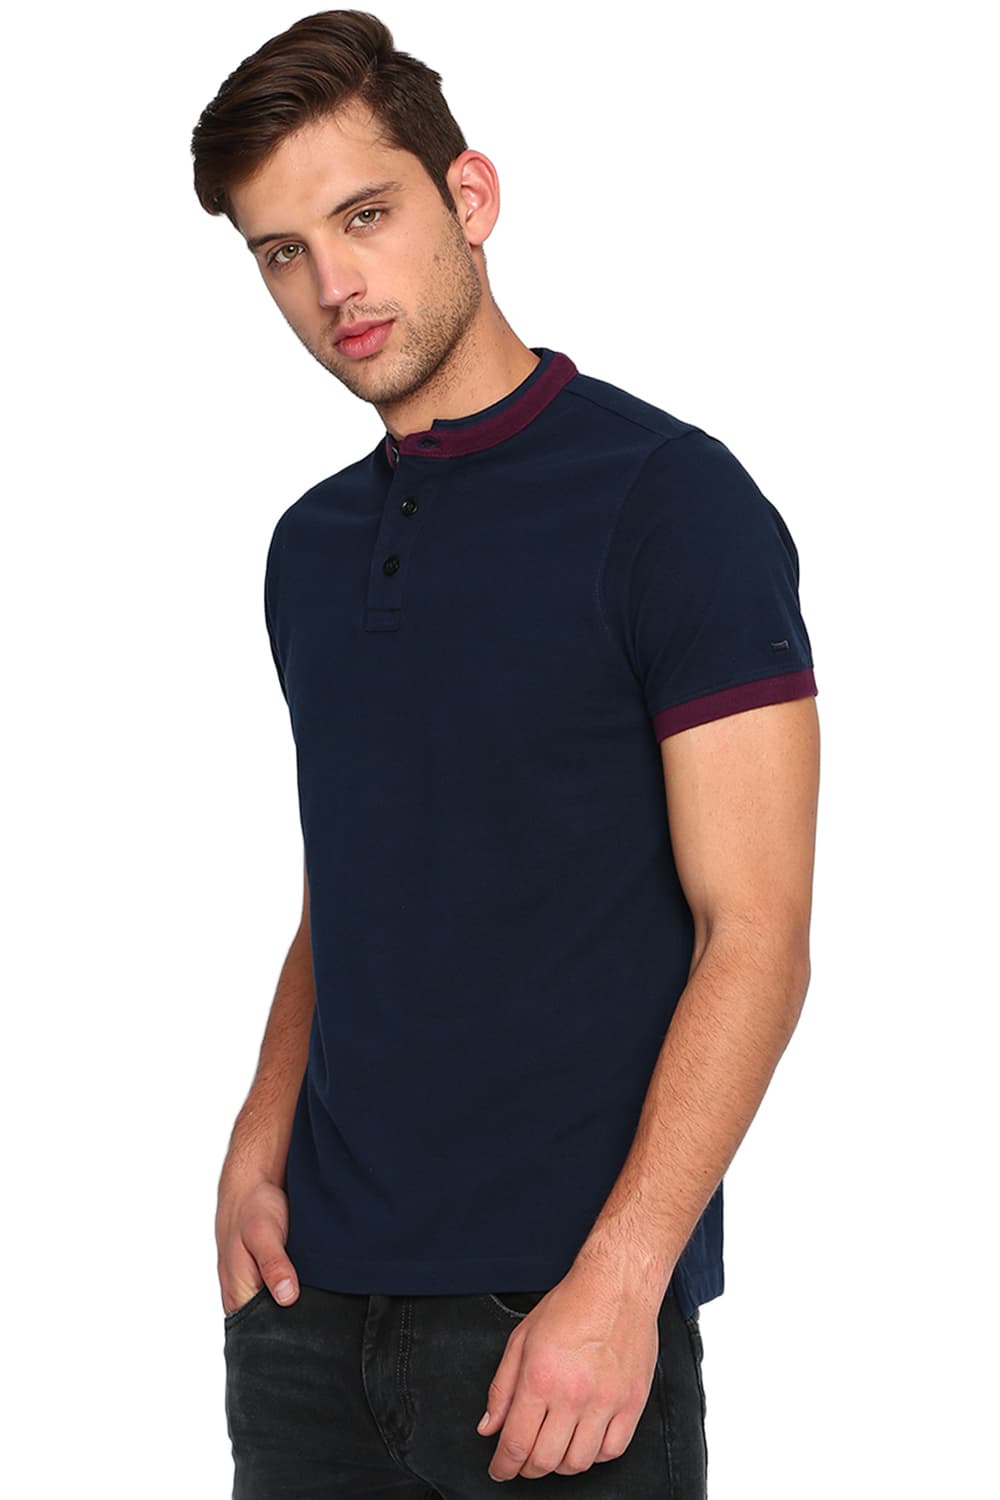 BASICS MUSCLE FIT STAND UP COLLAR POLO T SHIRT